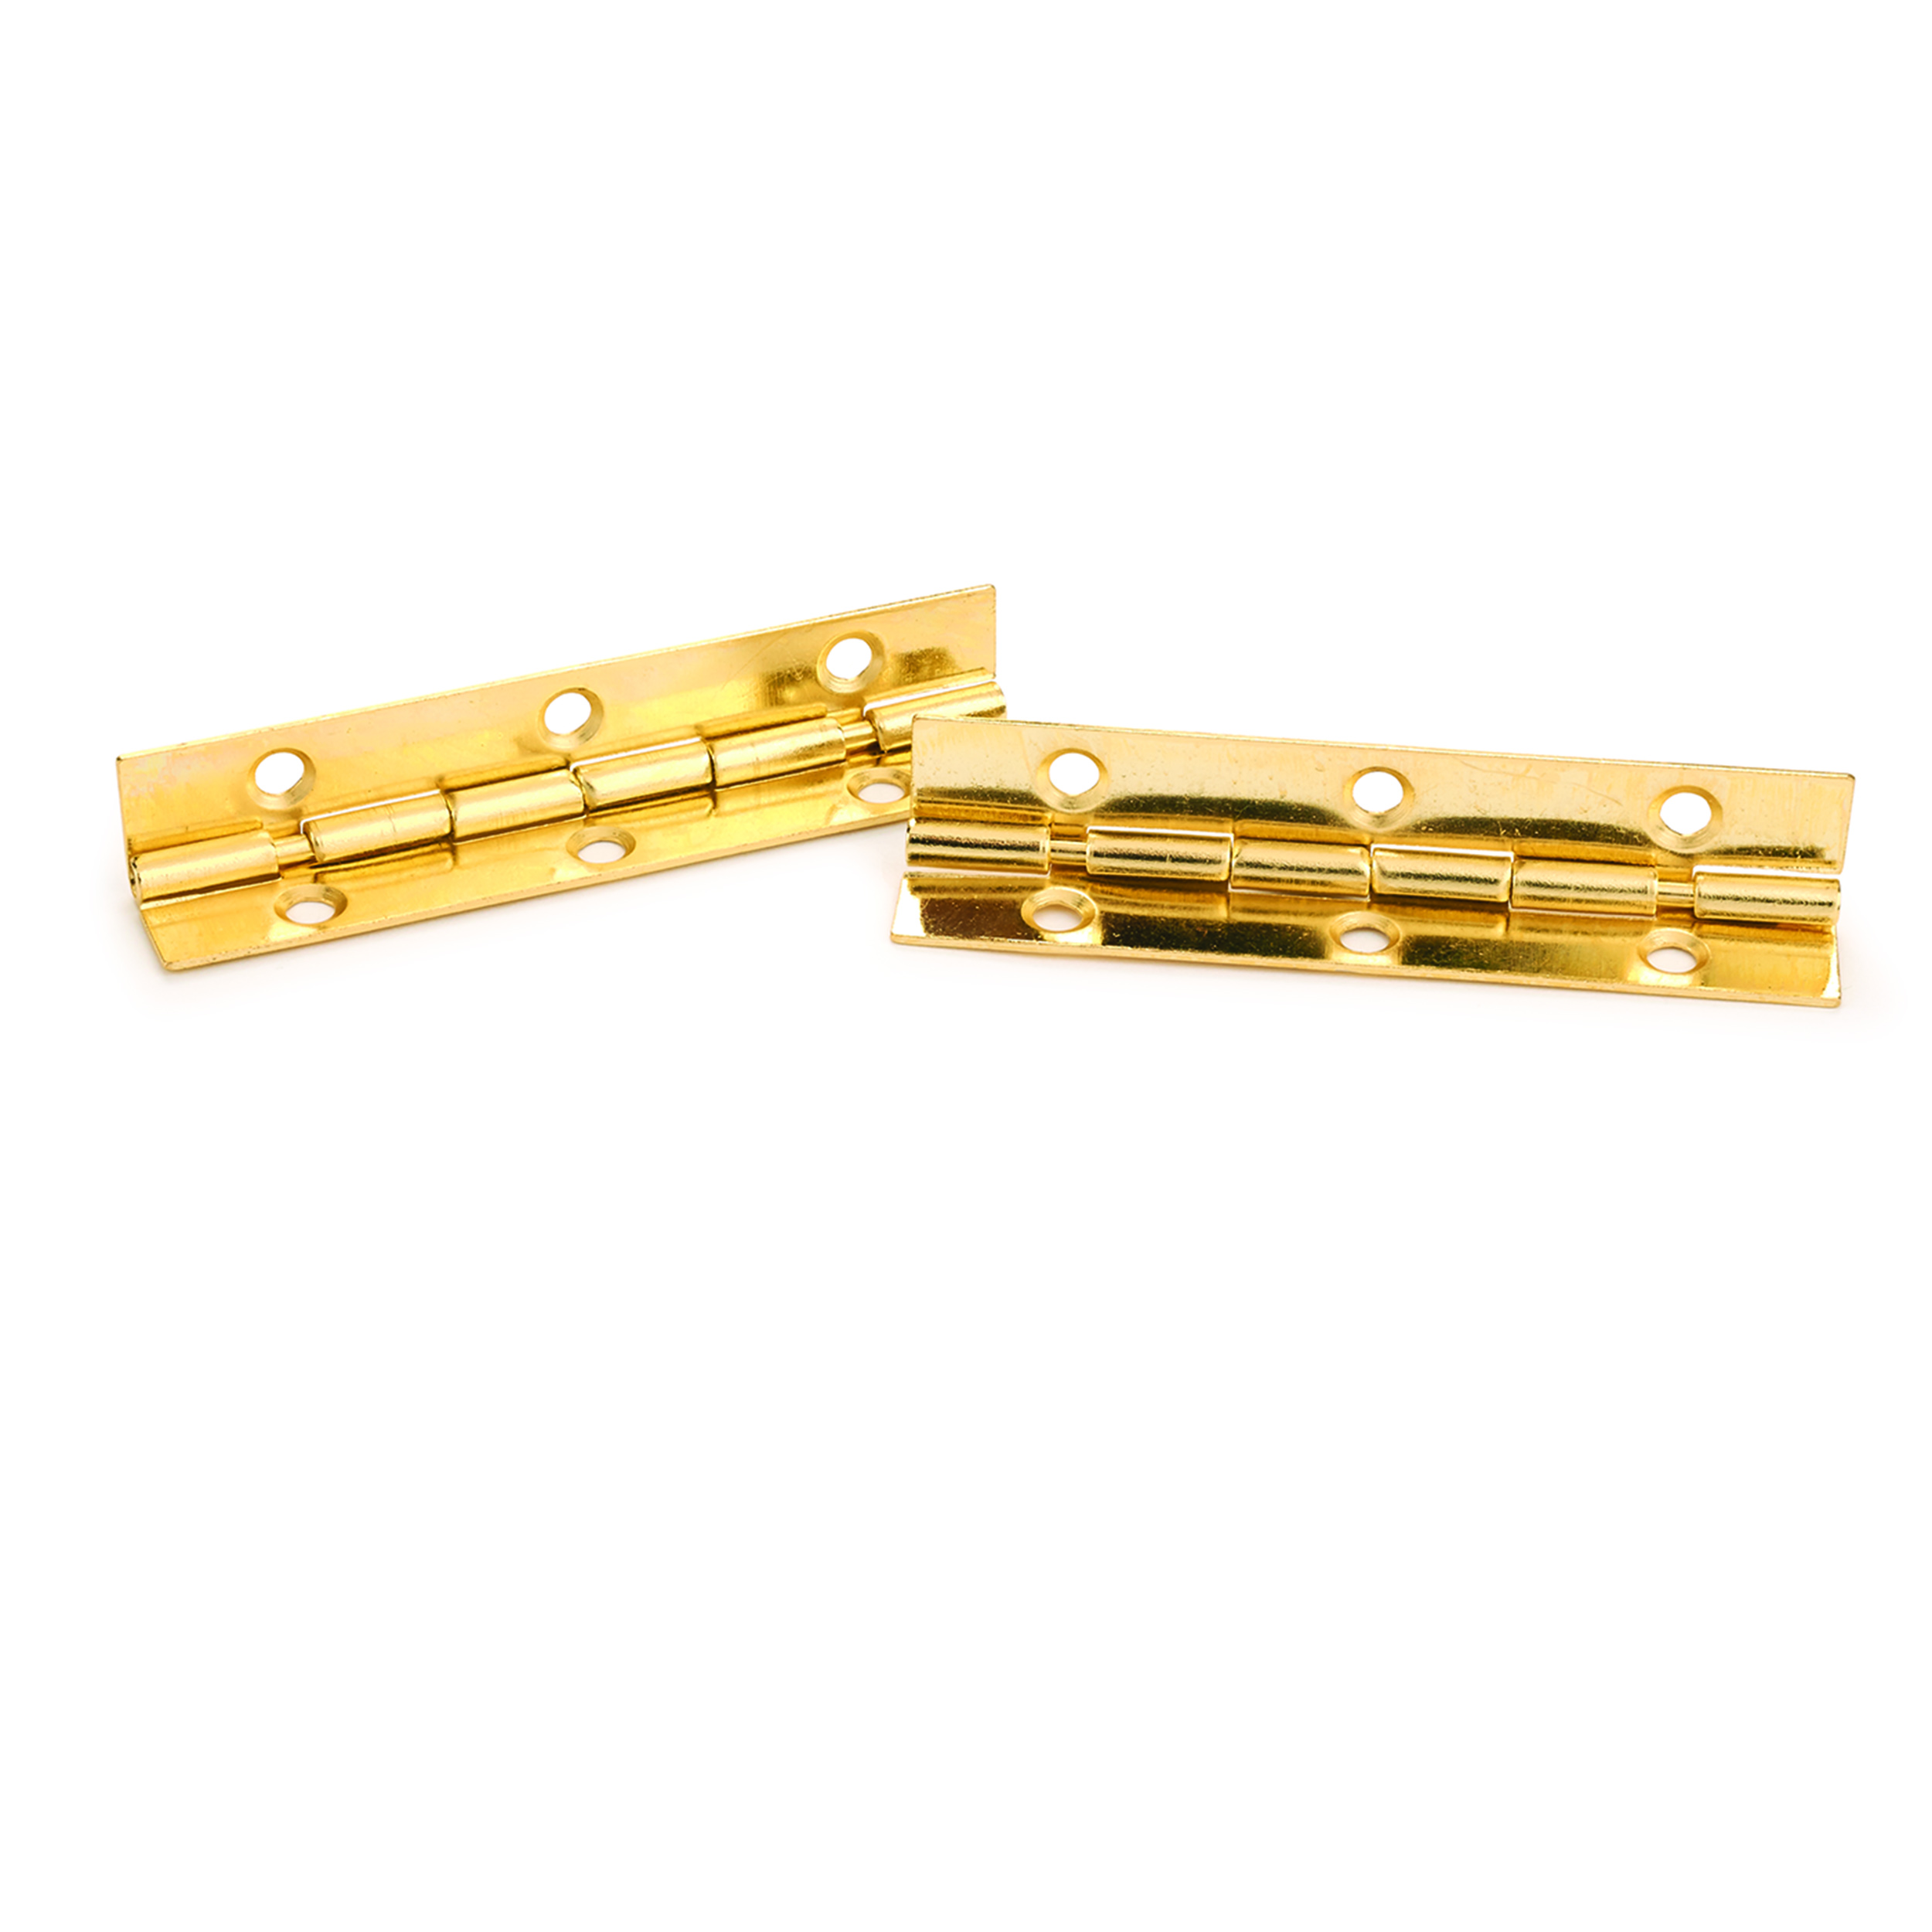 105 Degree Stop Hinge Brass Plated 2" Pair